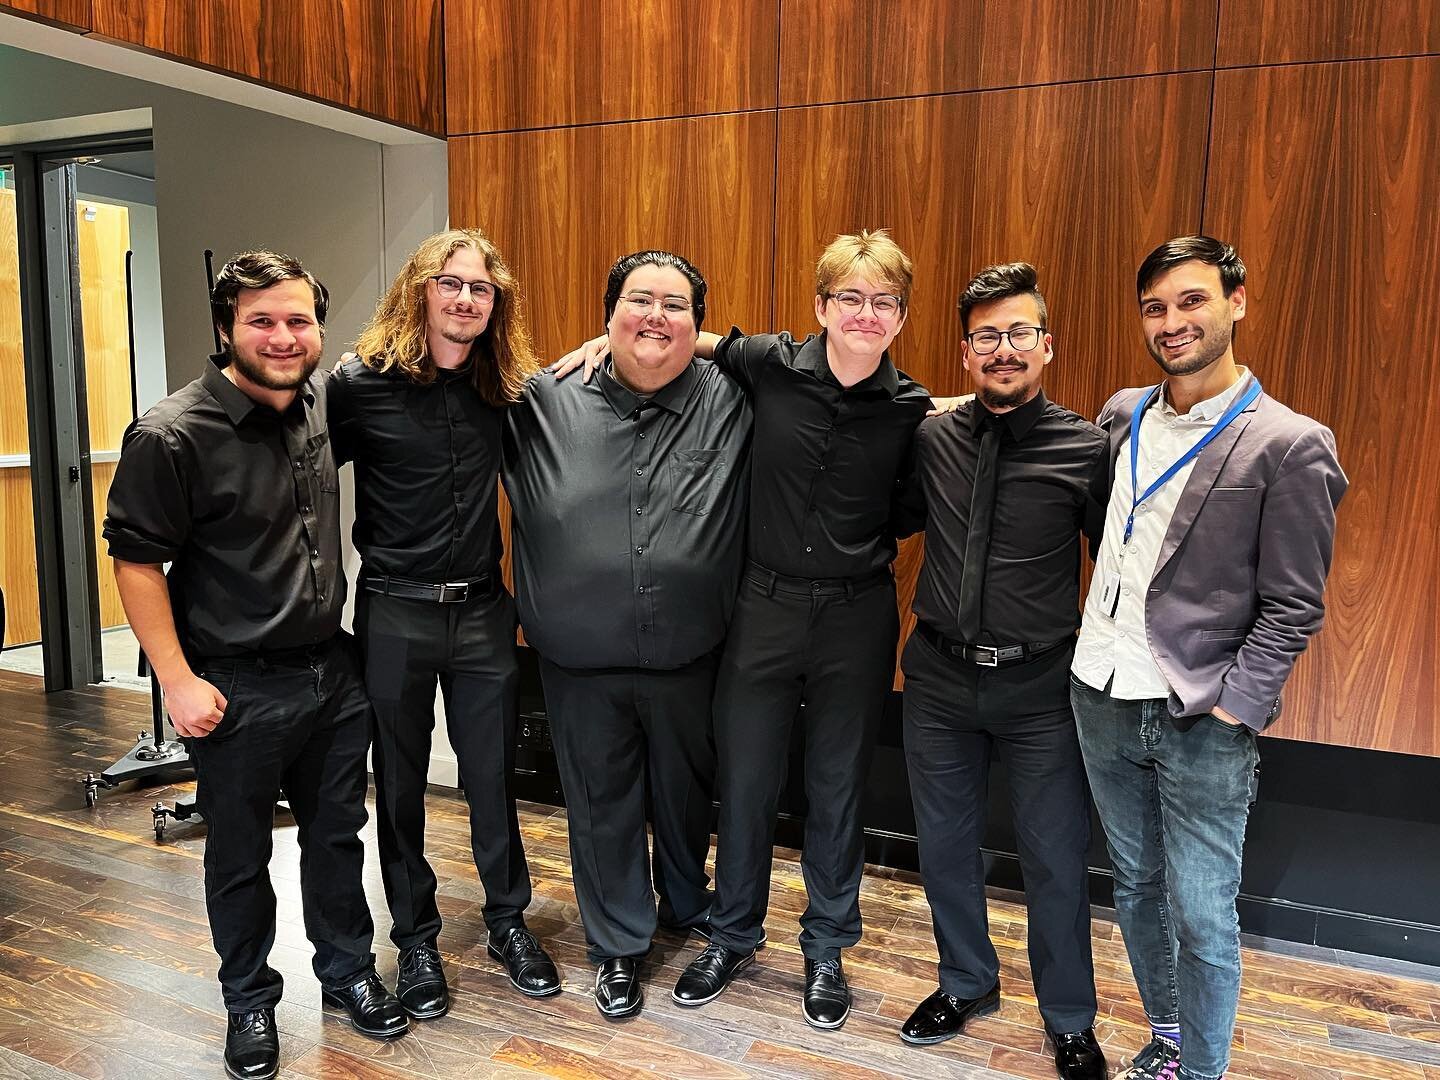 Super late to the party but shoutout to my @accmusicdept student&rsquo;s performances on their semester wind ensemble concert this past Fall! It was a pleasure to get to play with them a little, and it&rsquo;s looking like an exciting spring ahead wi